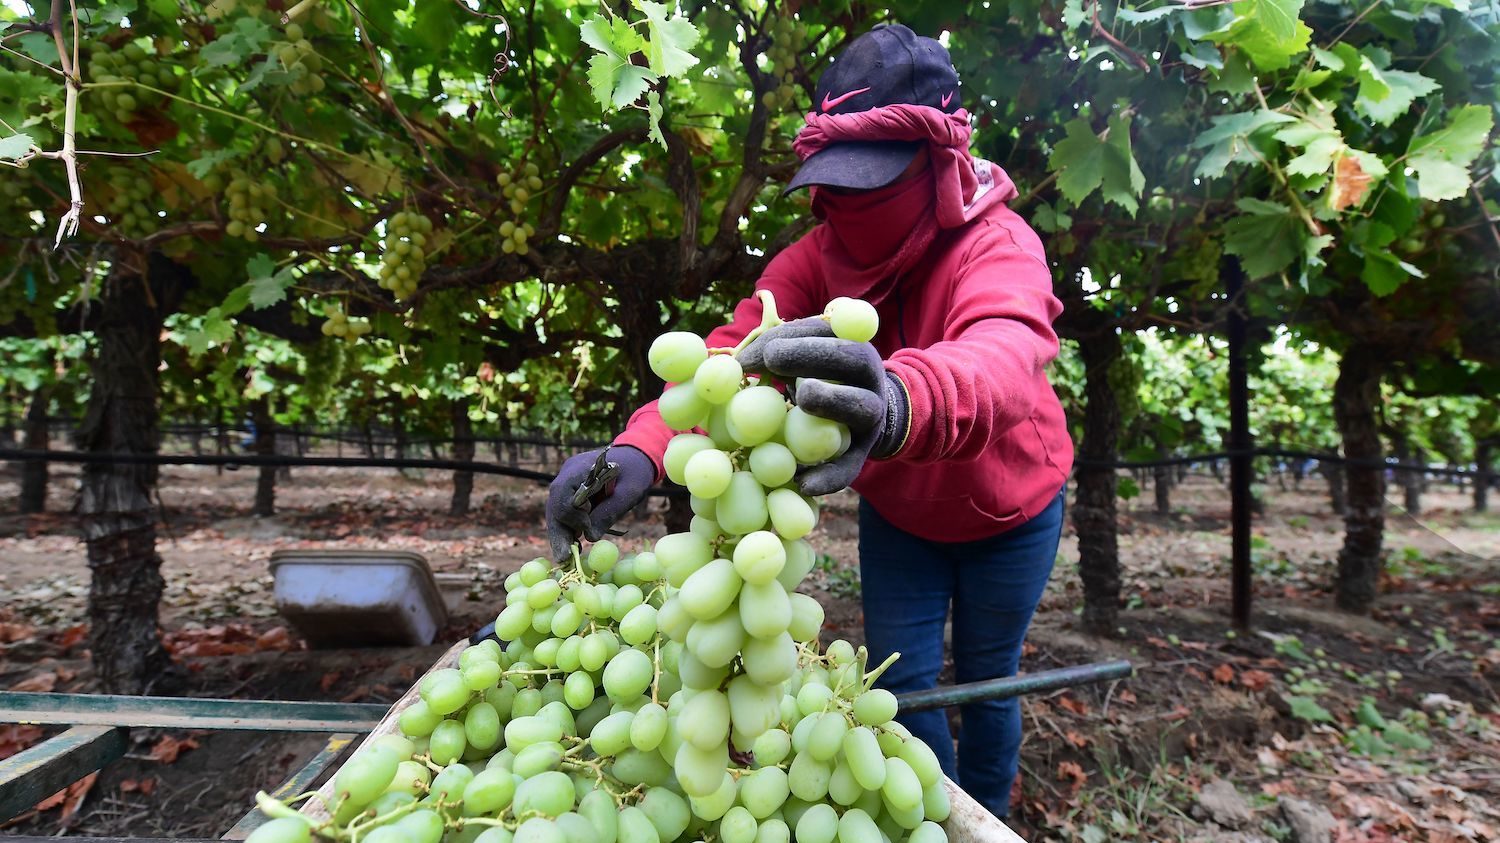 A farmworker picks grapes on October 4, 2021, in the Kern County town of Lamont, California, where record heat has fuelled drought and wildfires.